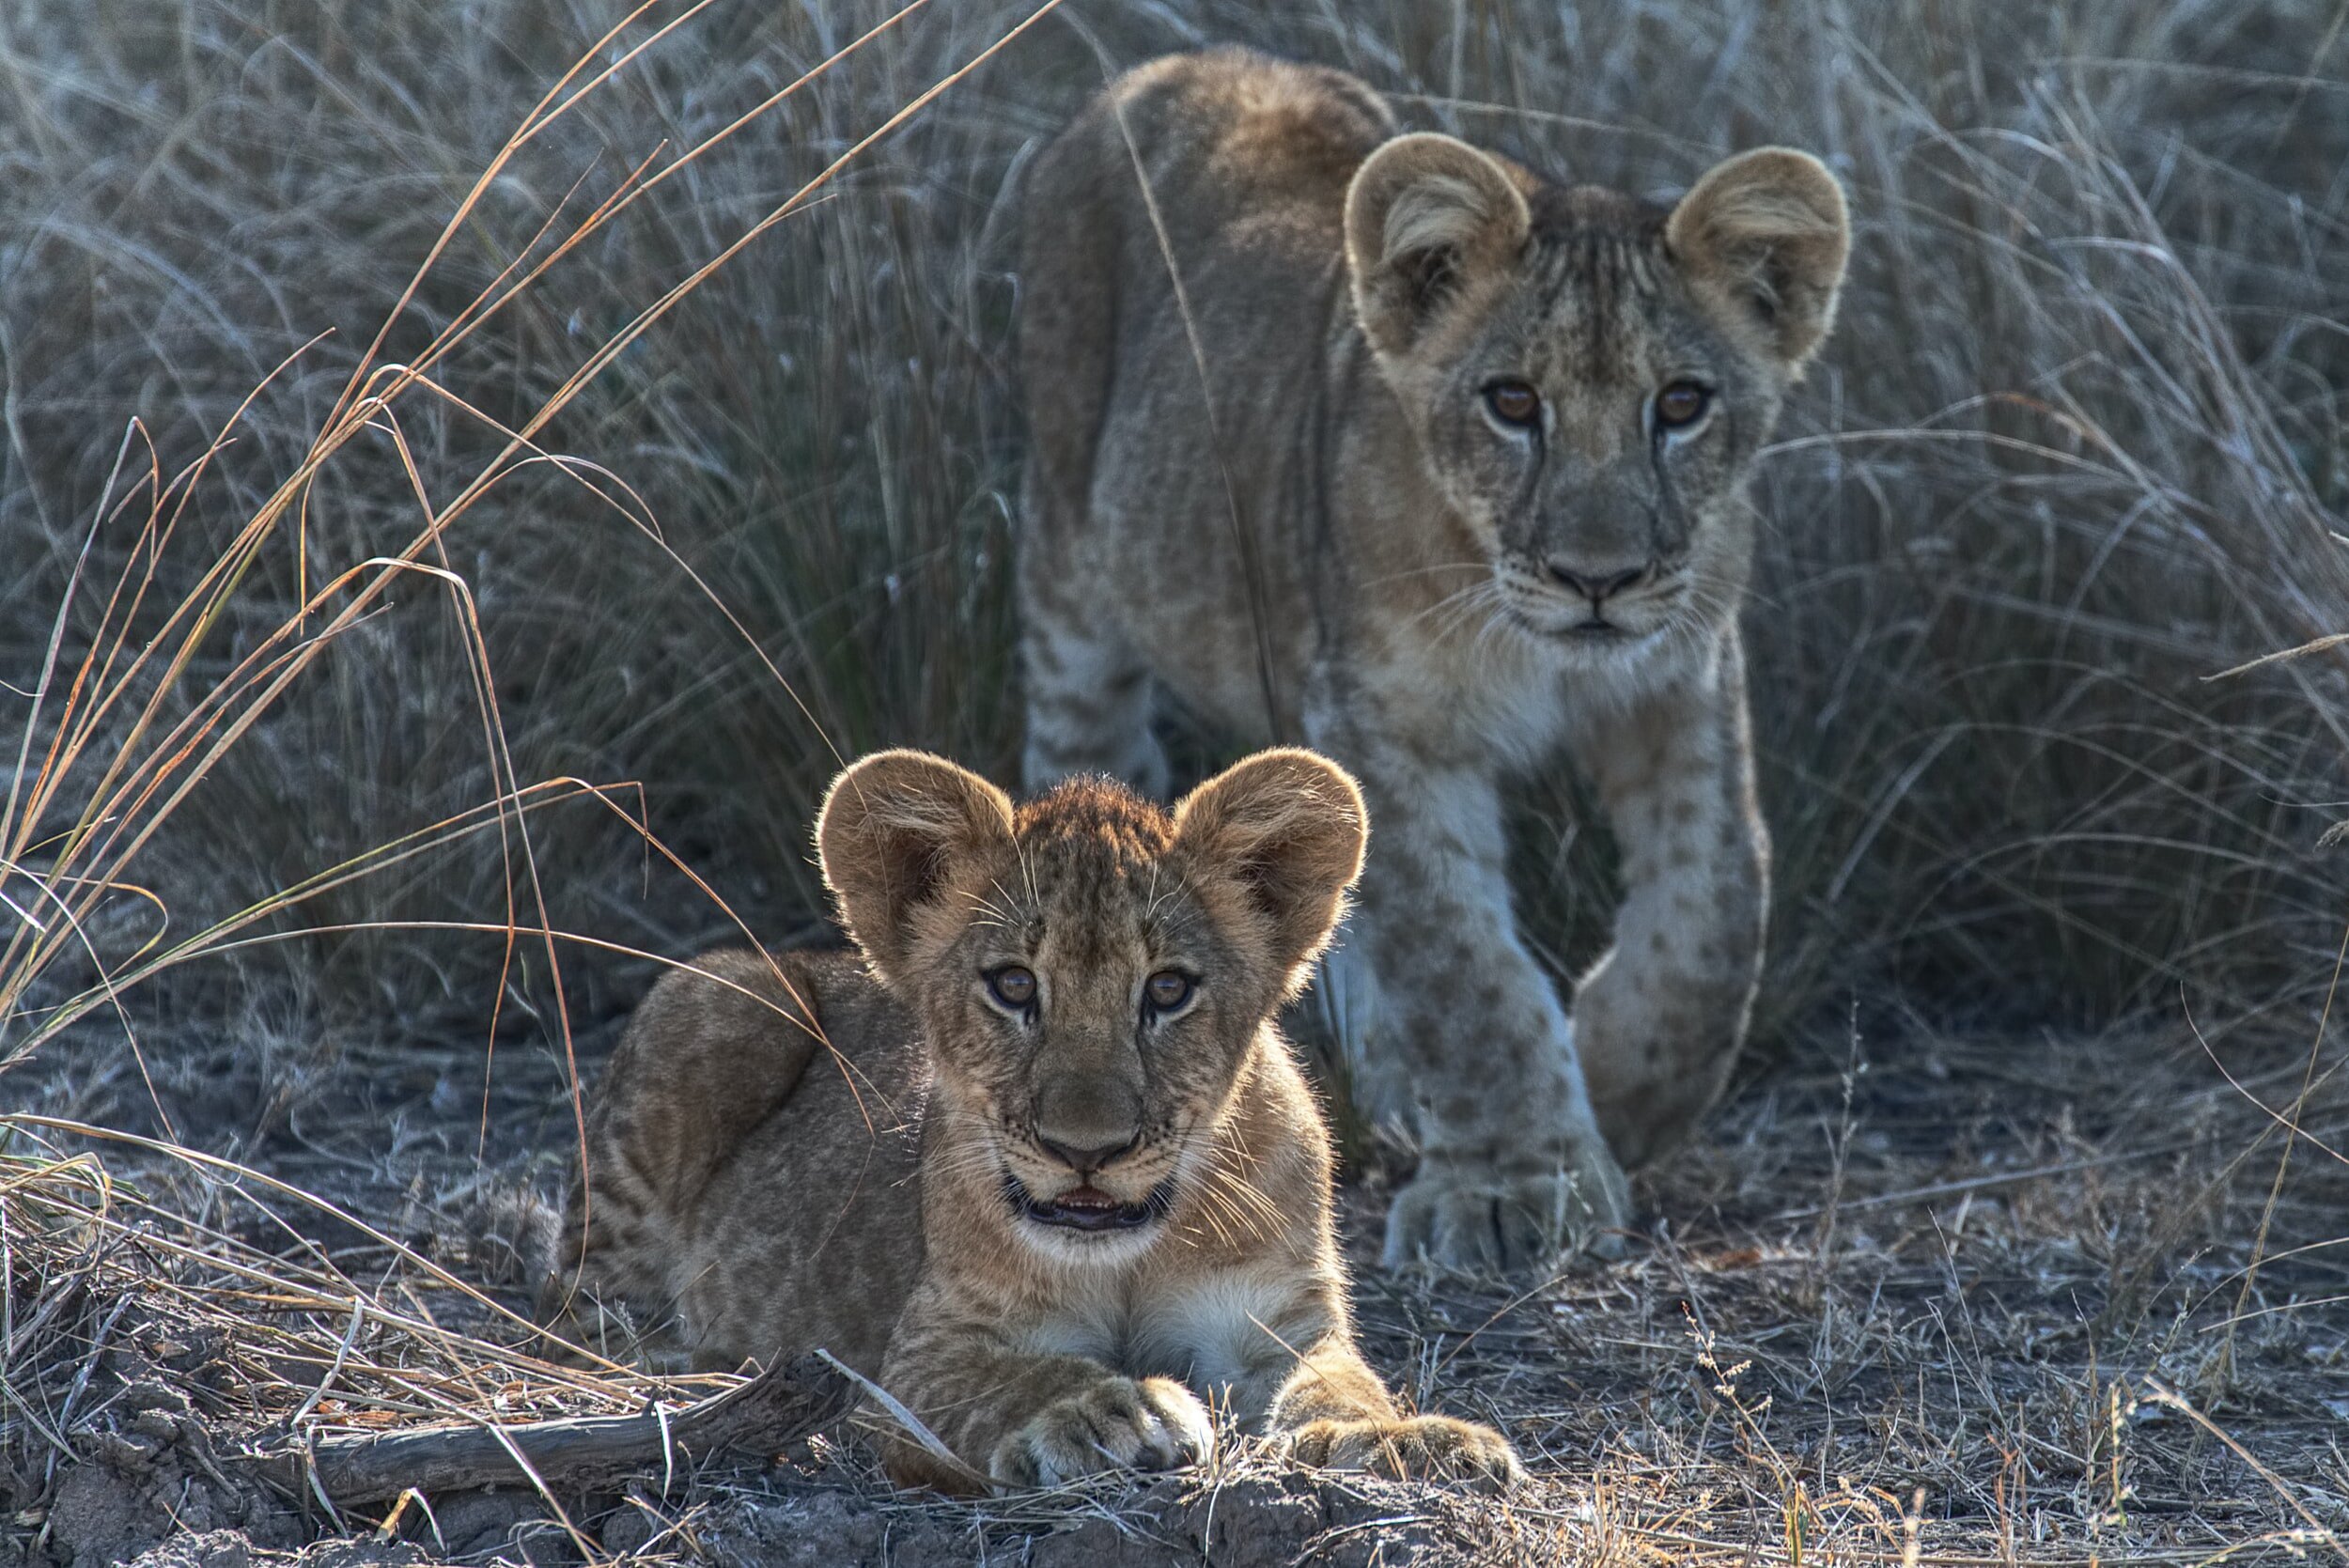 PICTURED: Lion cubs in Luangwa National Park, Zambia.